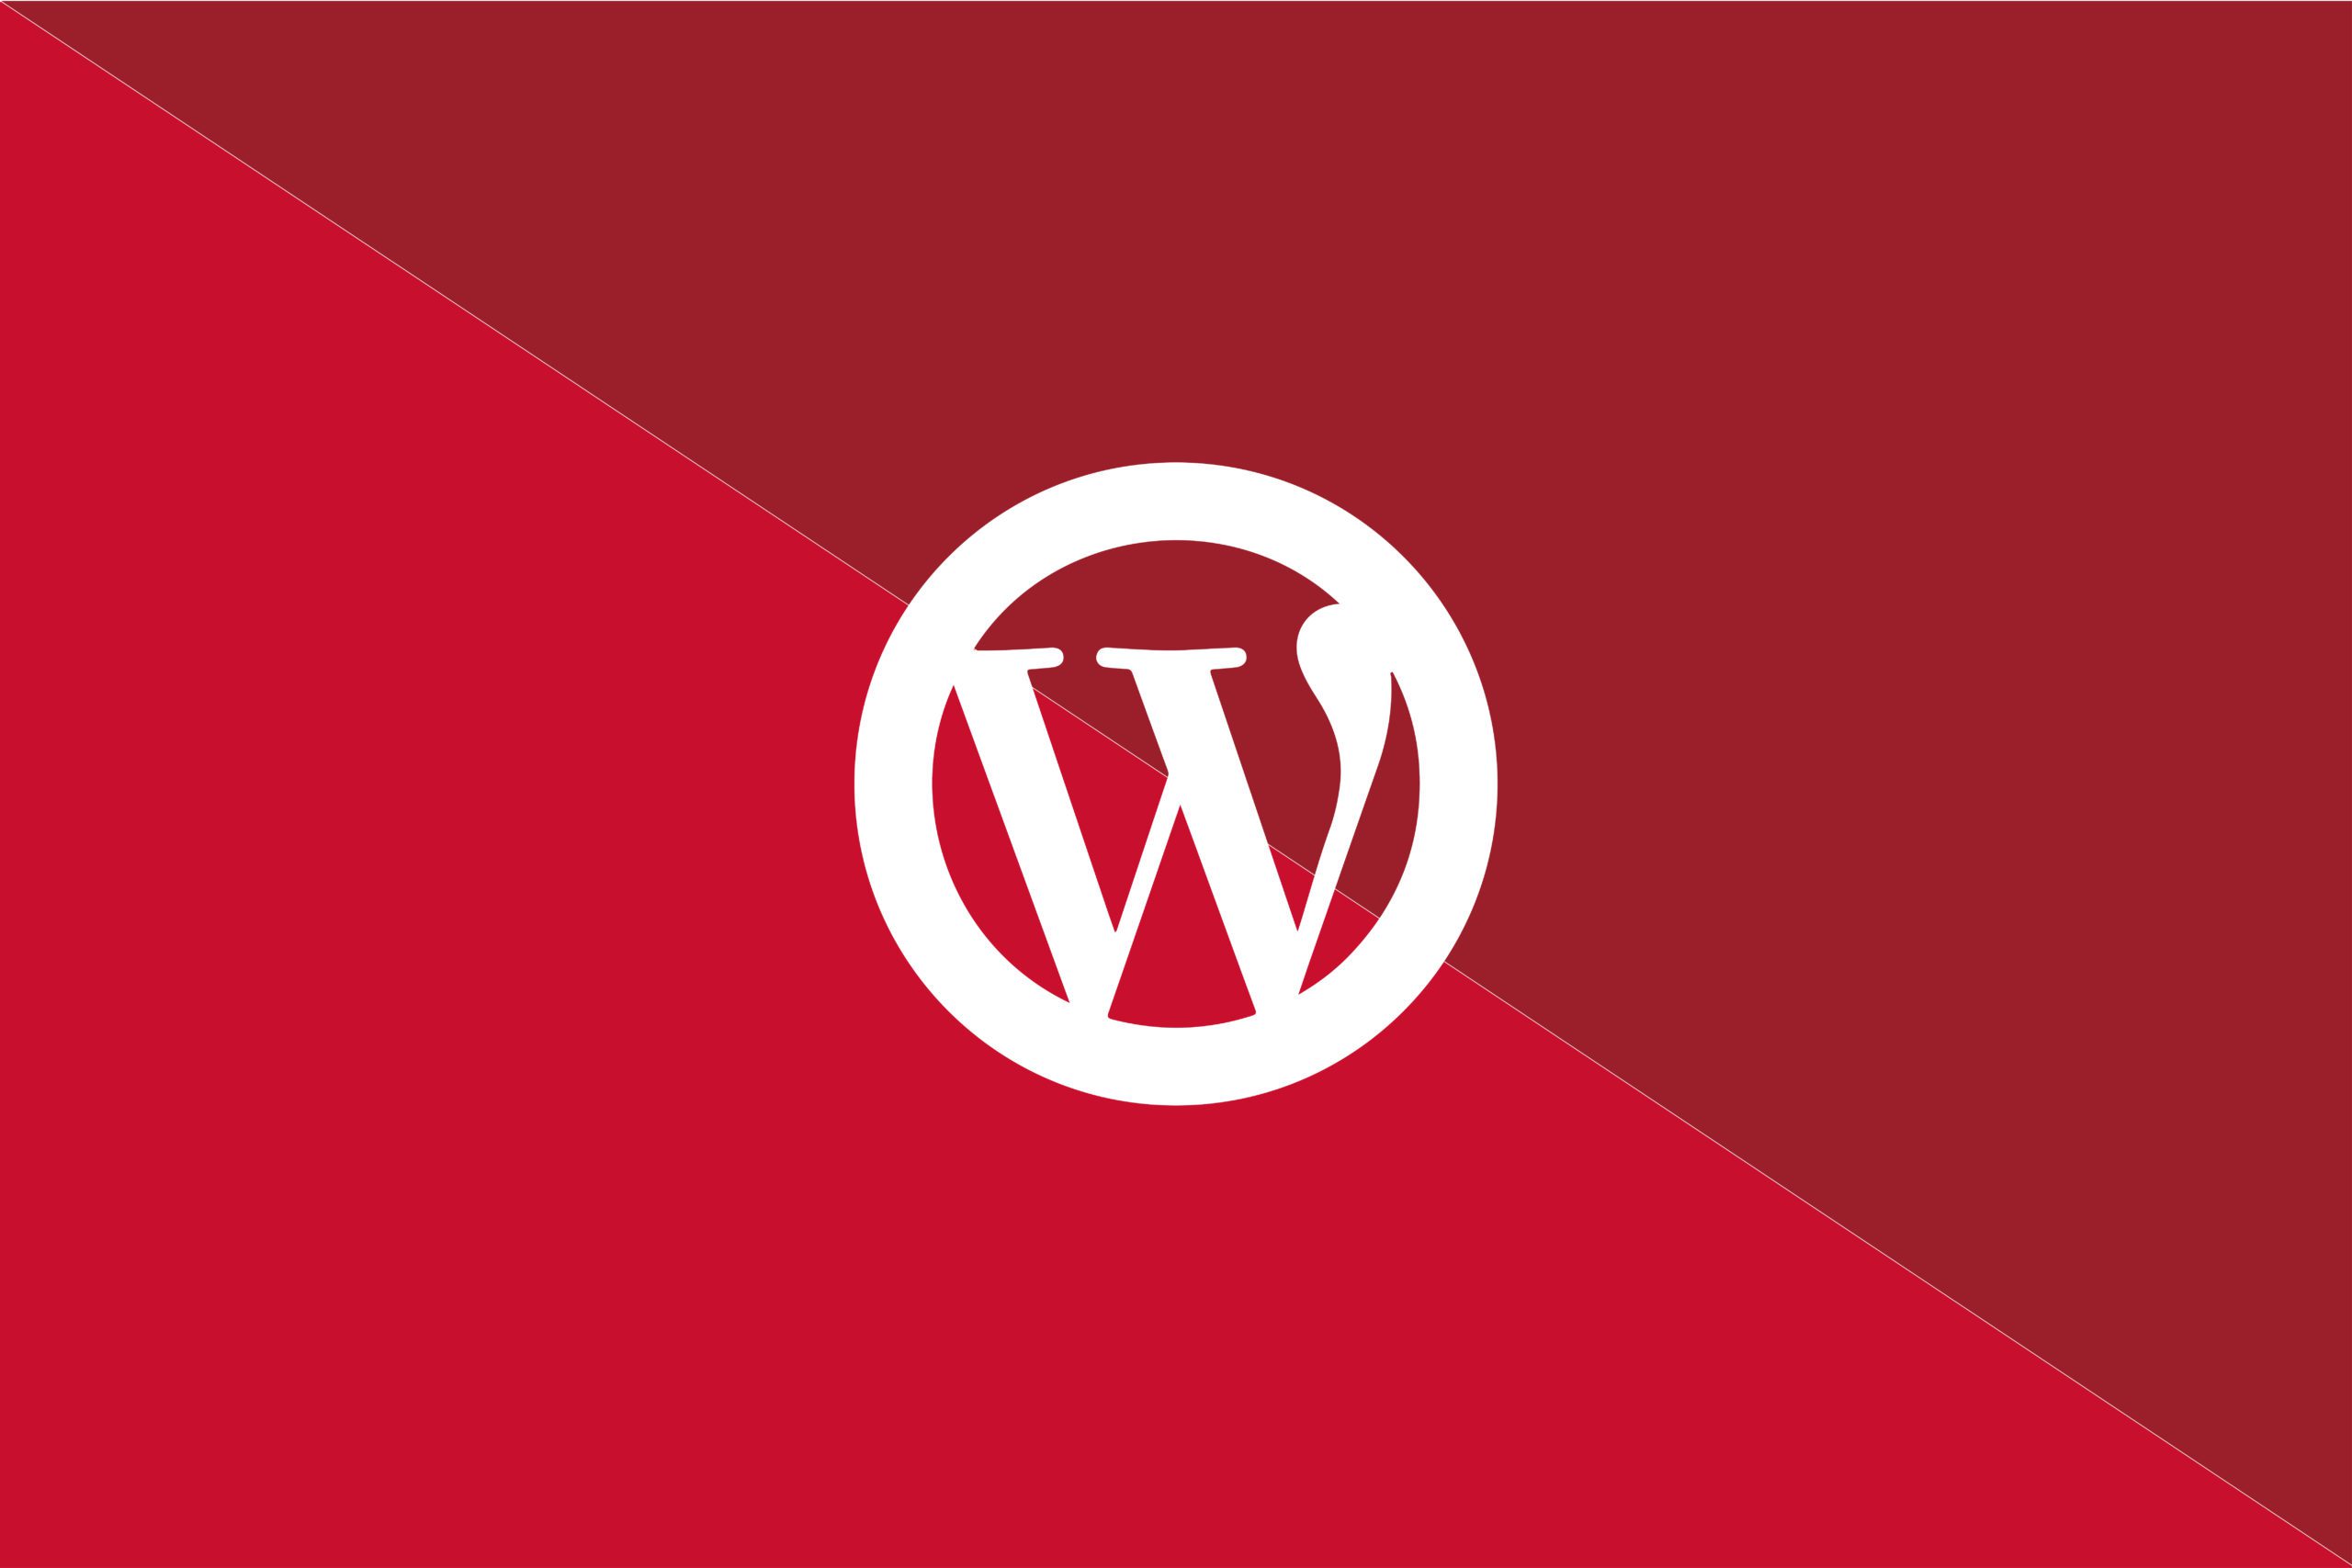 White WordPress logo on a red background representing the web design services at ipulse creative agency Hong Kong